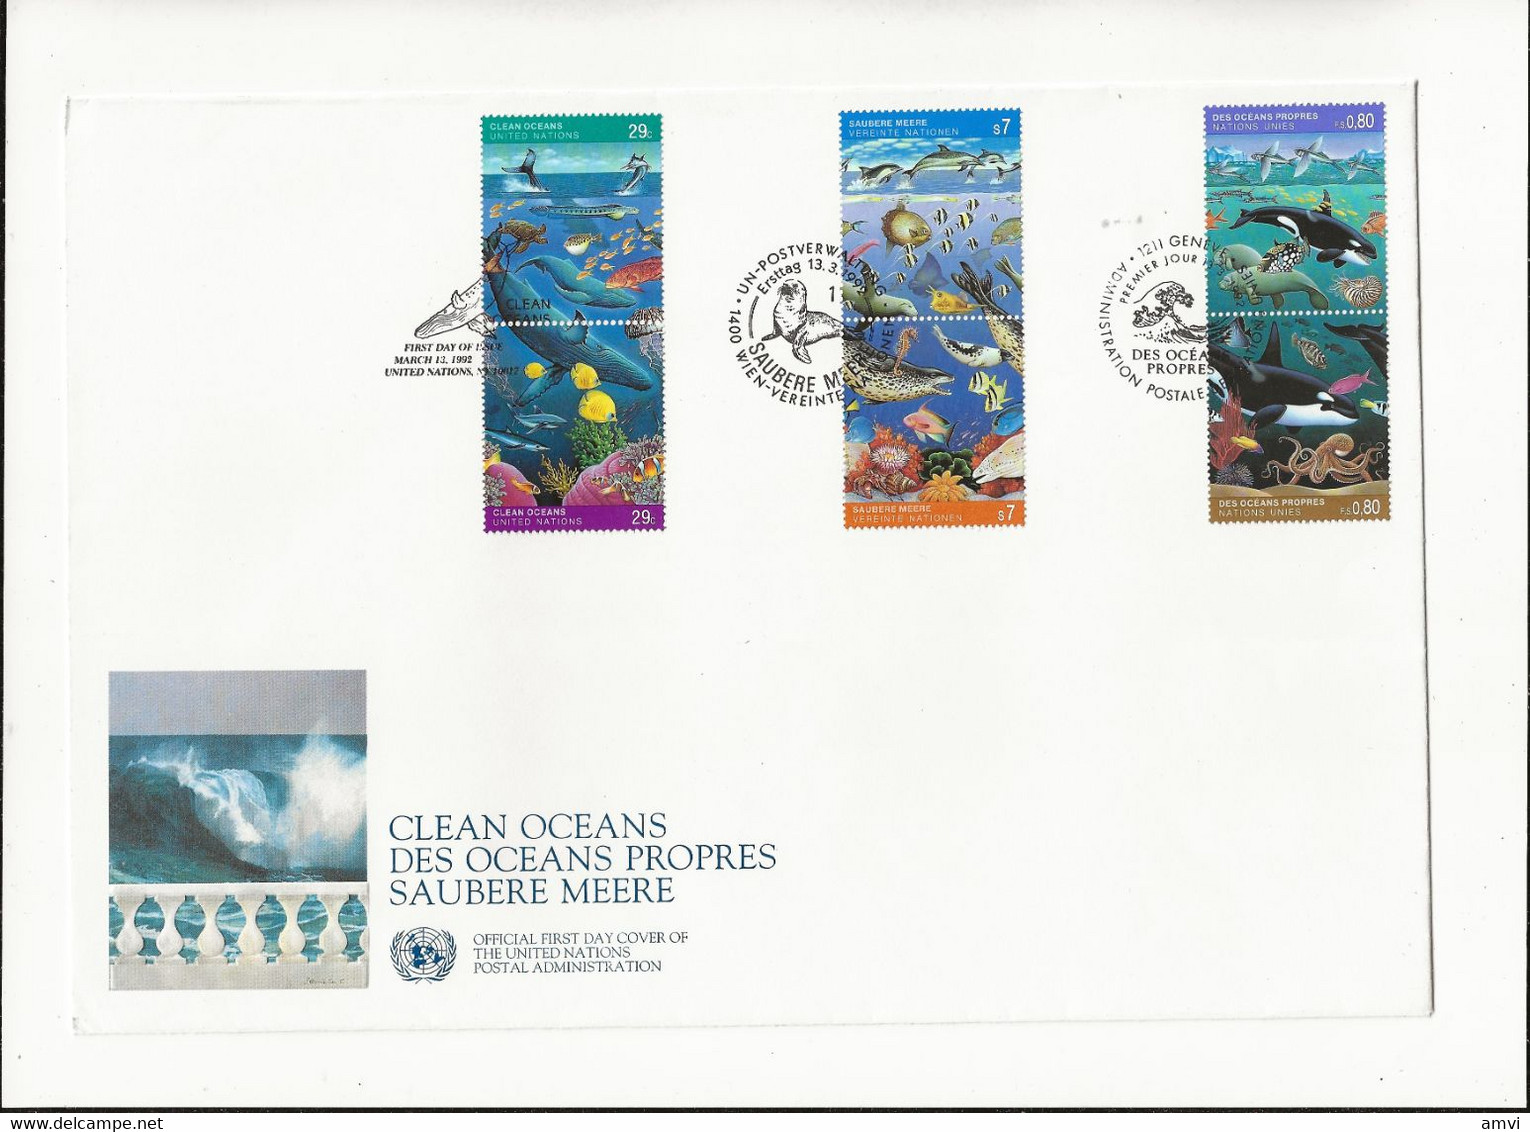 22-4 - 878 WHALES DOLPHIN FISH Multi Stamps FDC UN Vienna United Nations Environment Clean Oceans - Wale